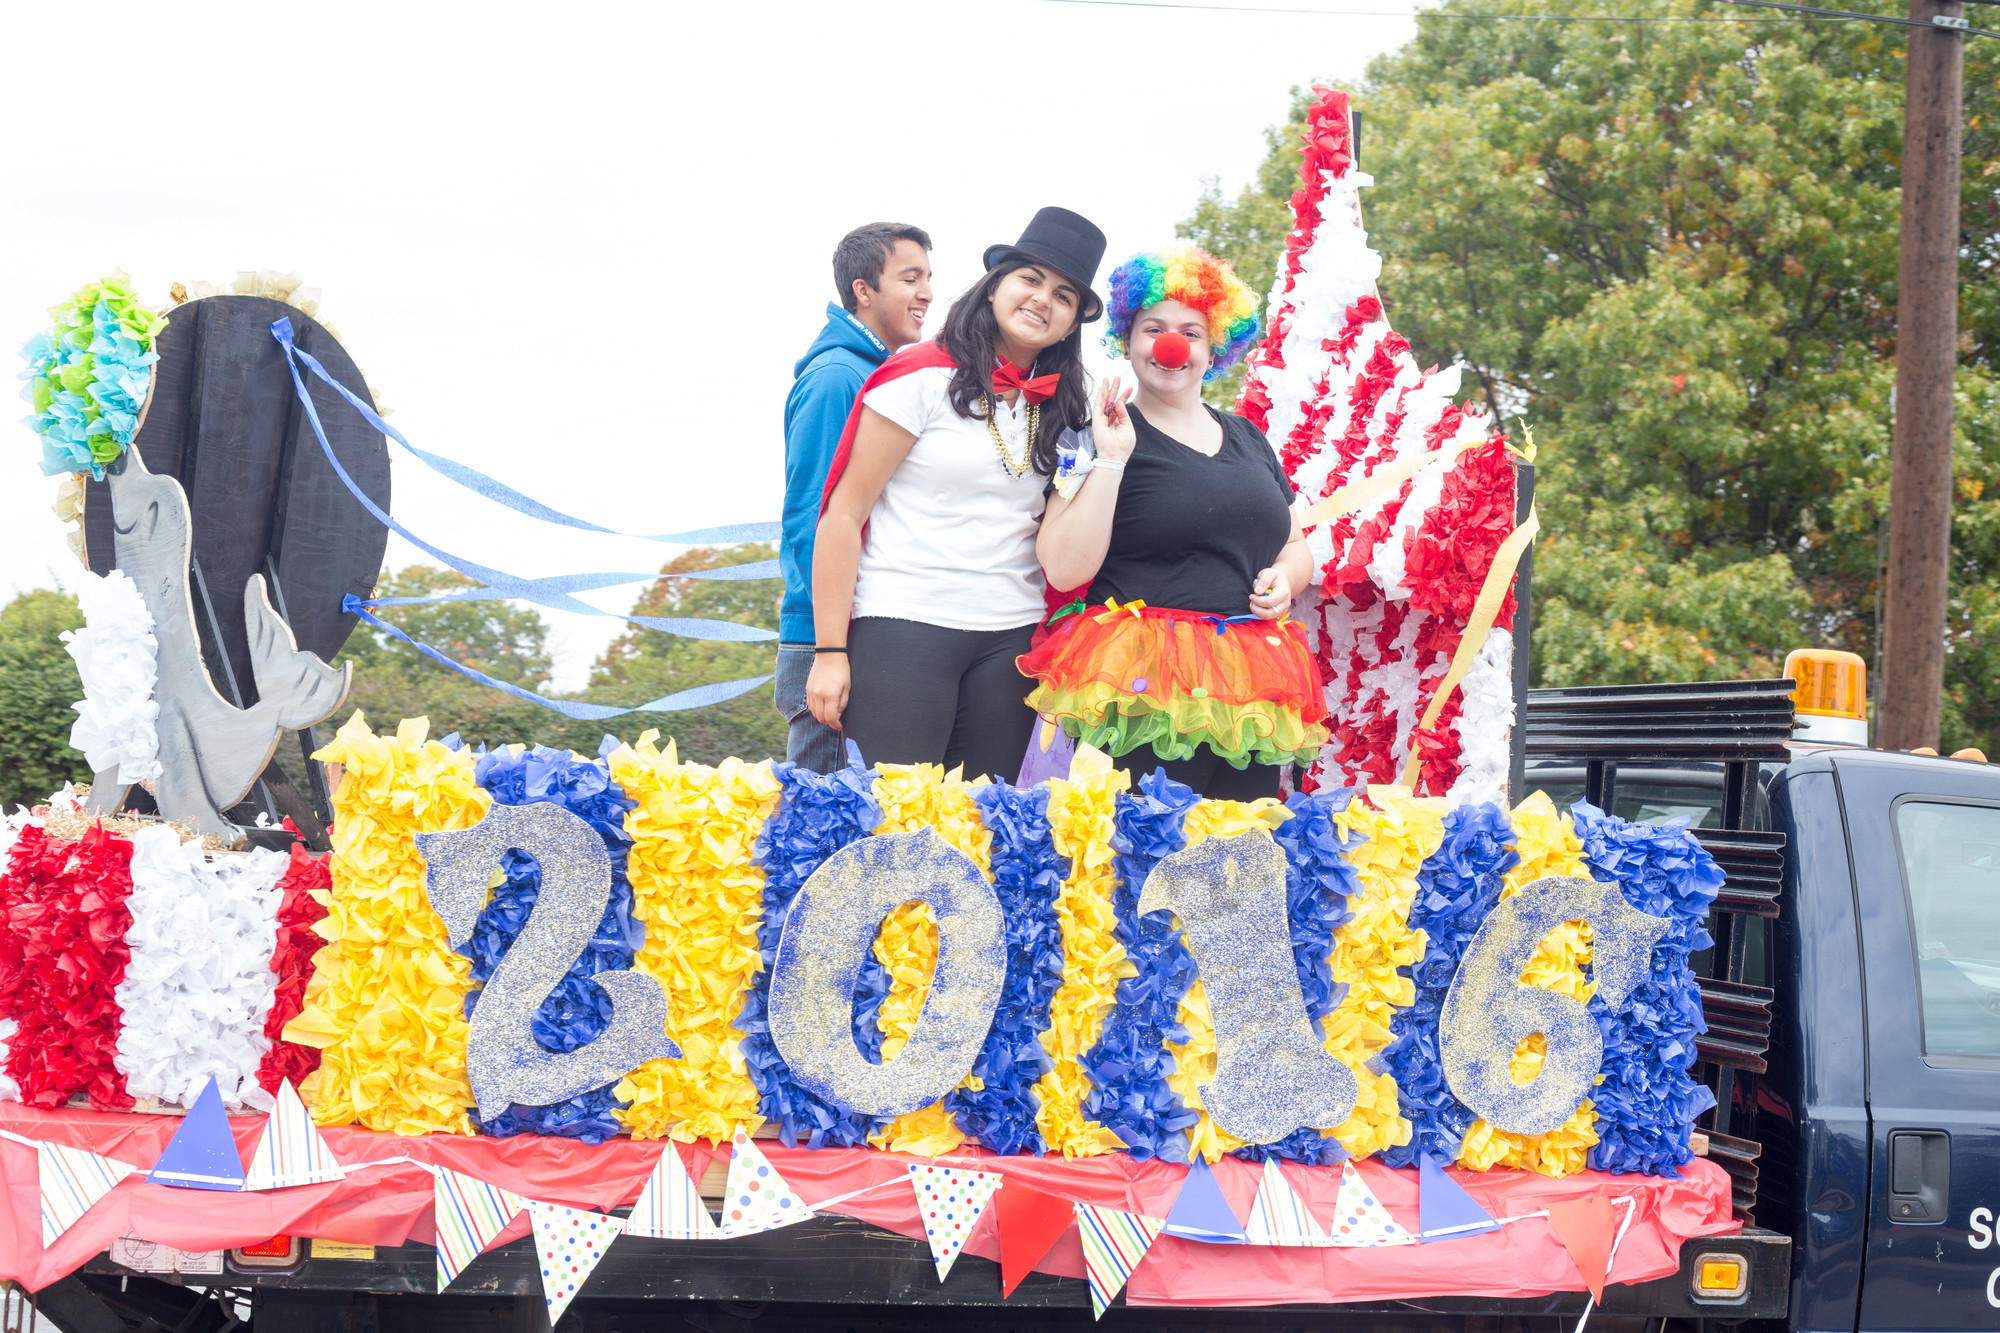 Seniors decorated their class float to look like a circus, in order to fit with the students’ tourist attraction theme.